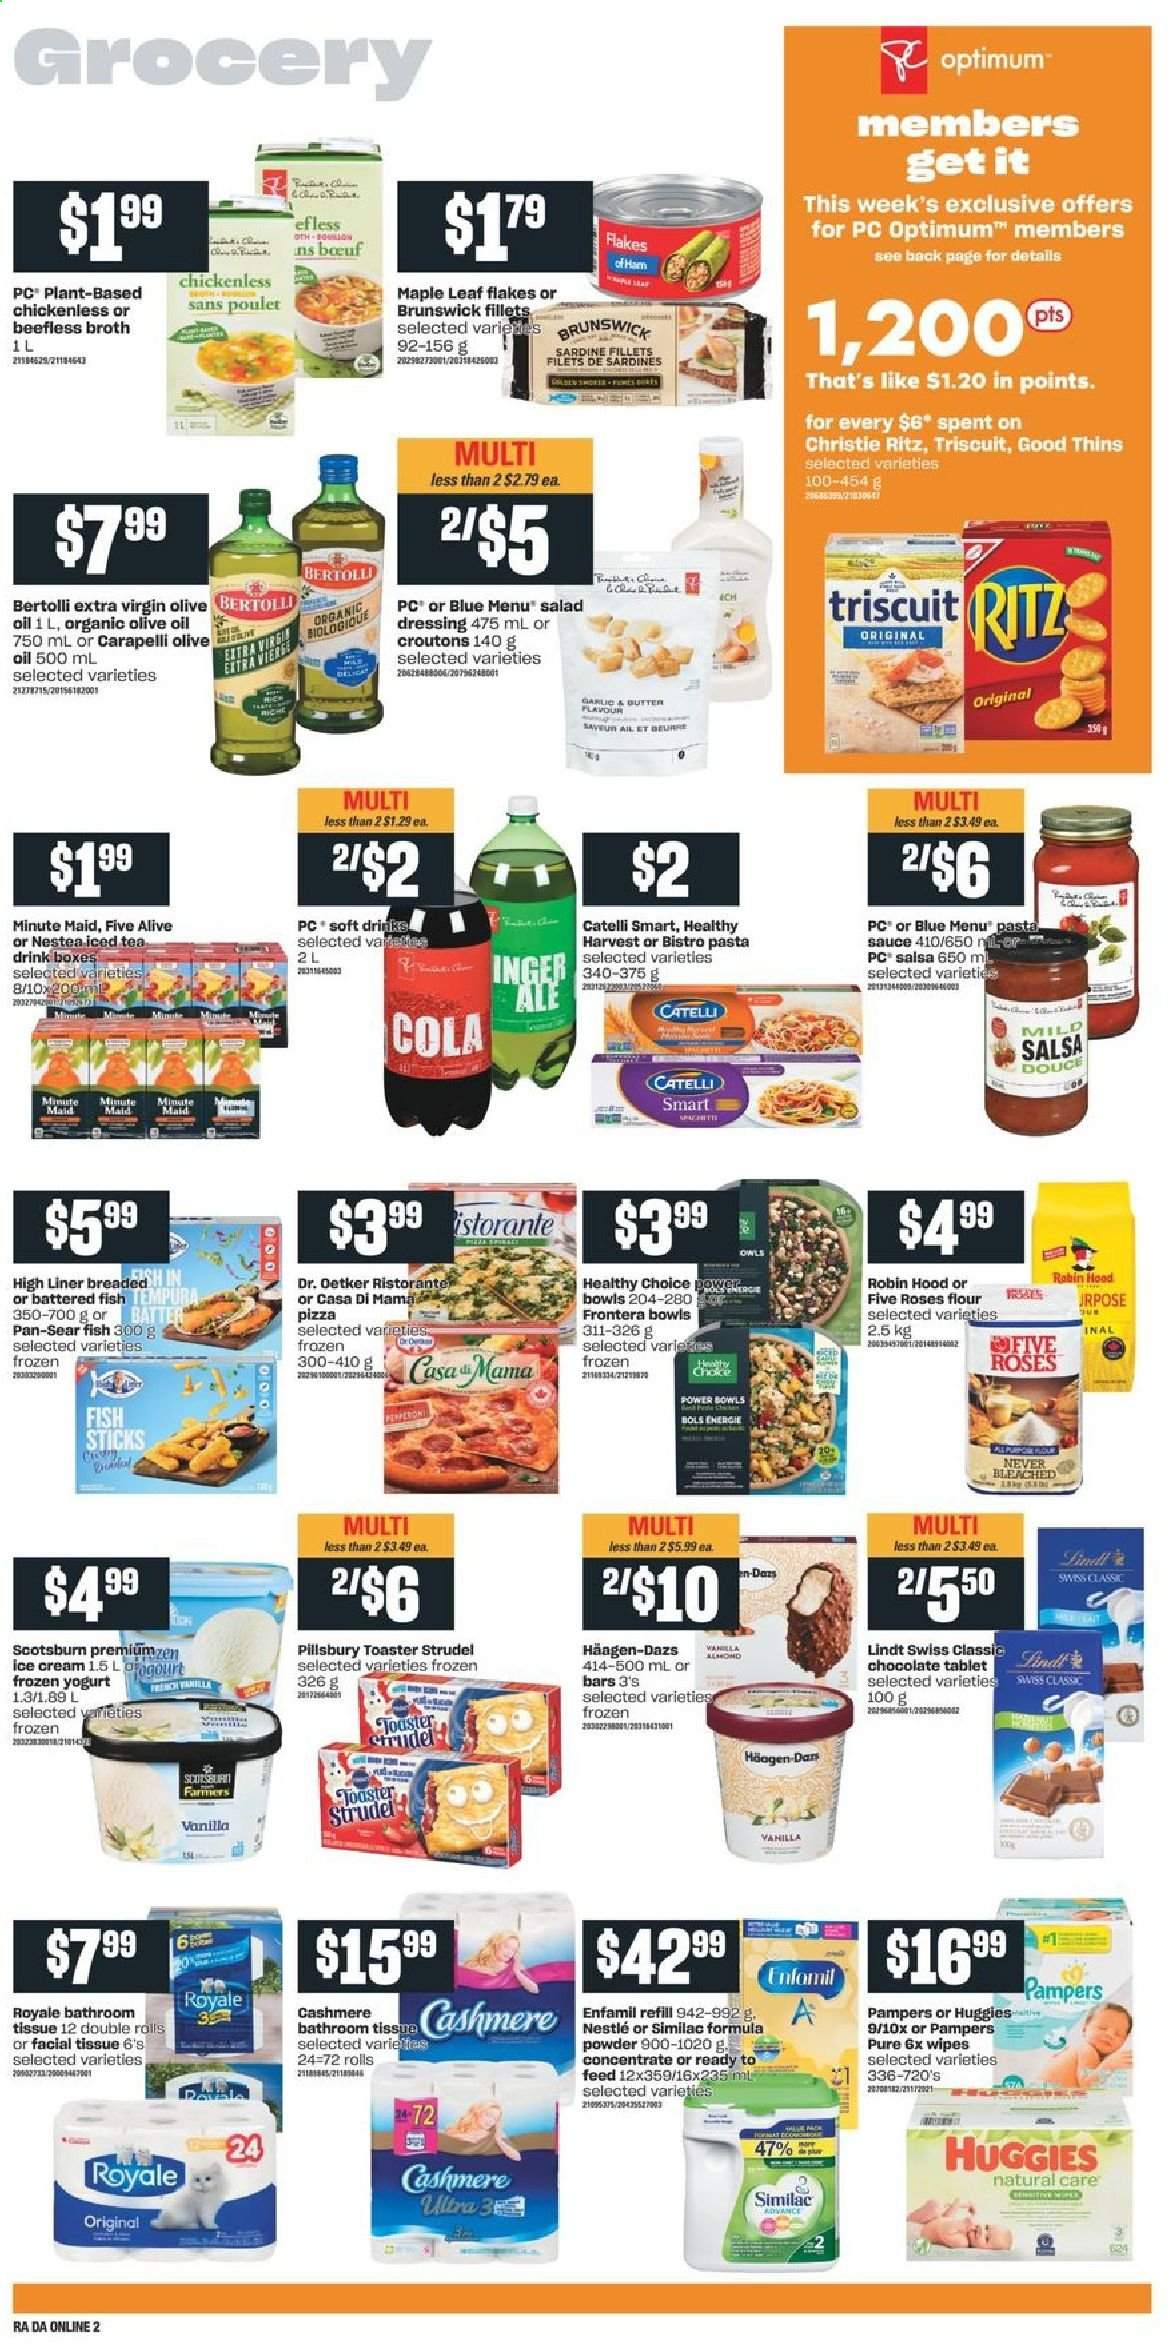 Atlantic Superstore flyer  - January 14, 2021 - January 20, 2021. Page 6.